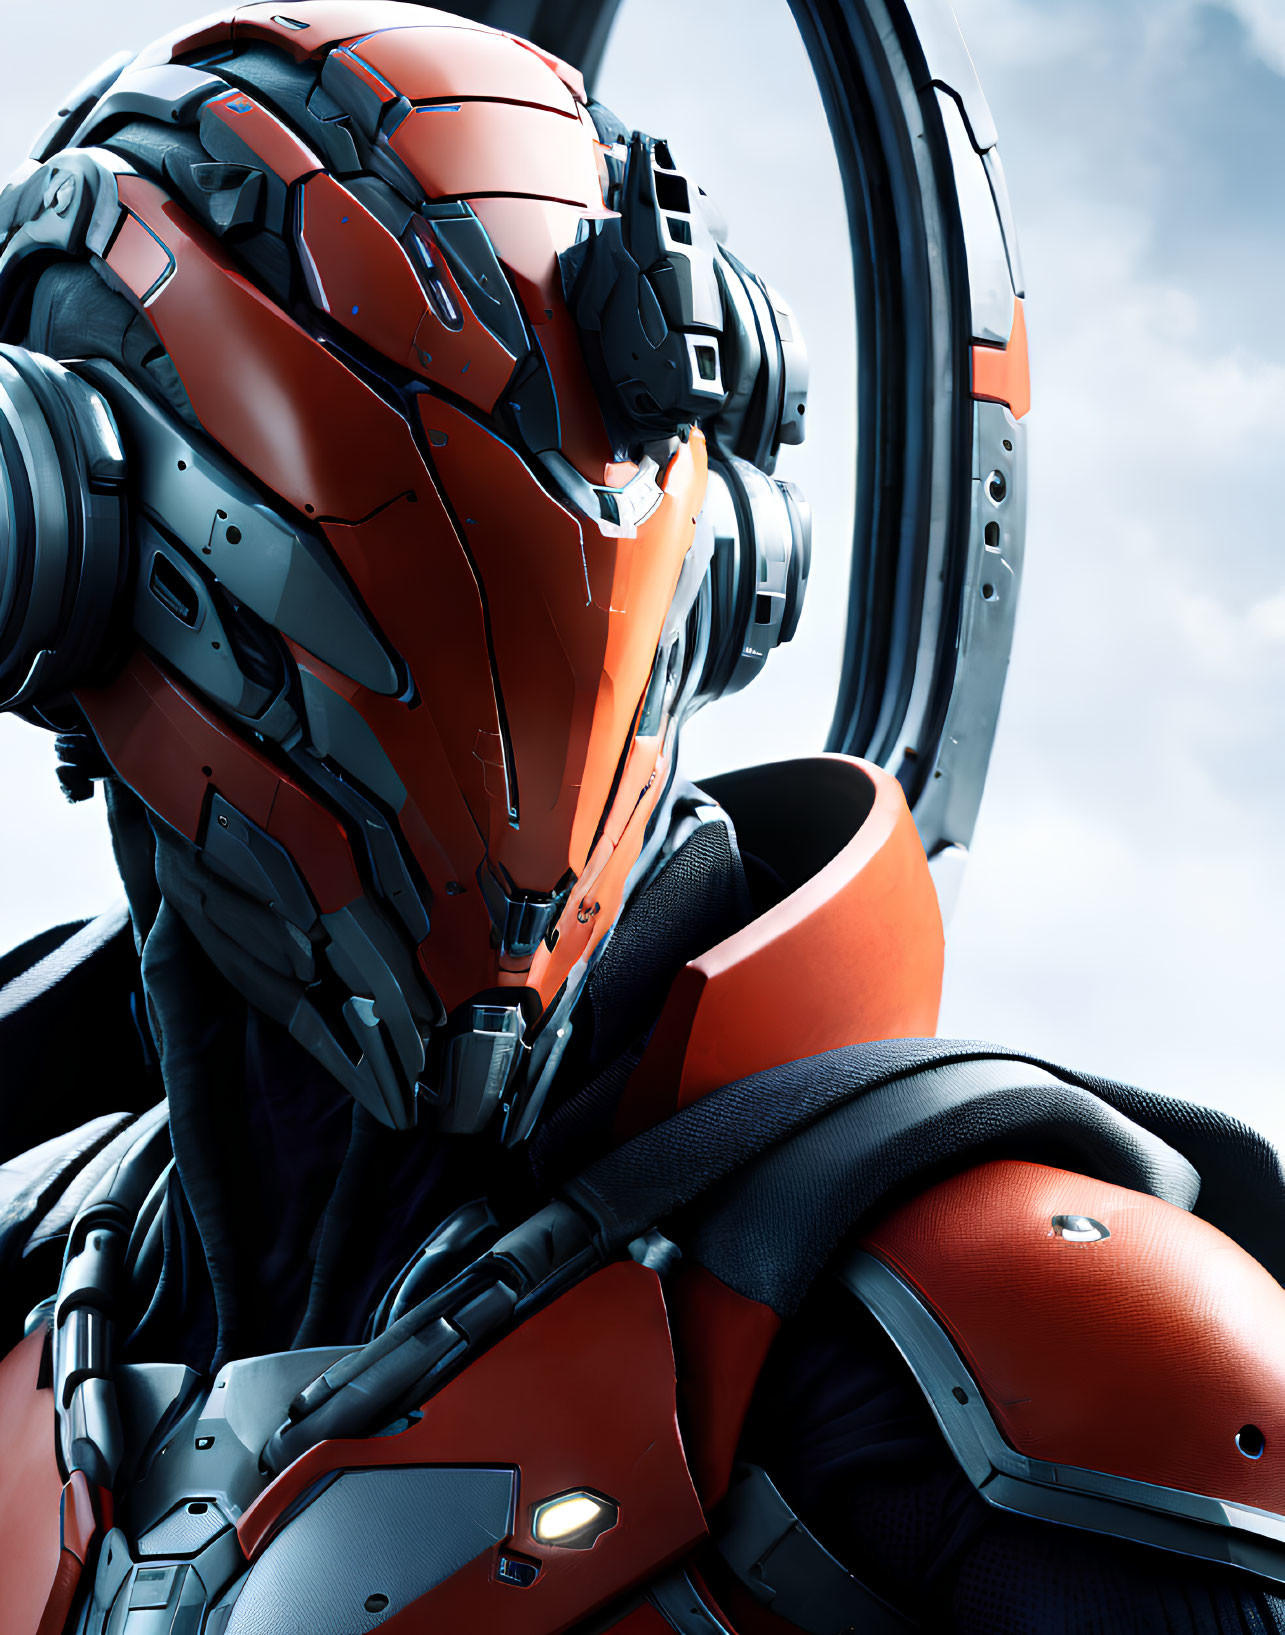 Futuristic red and grey armored suit with high-tech helmet close-up